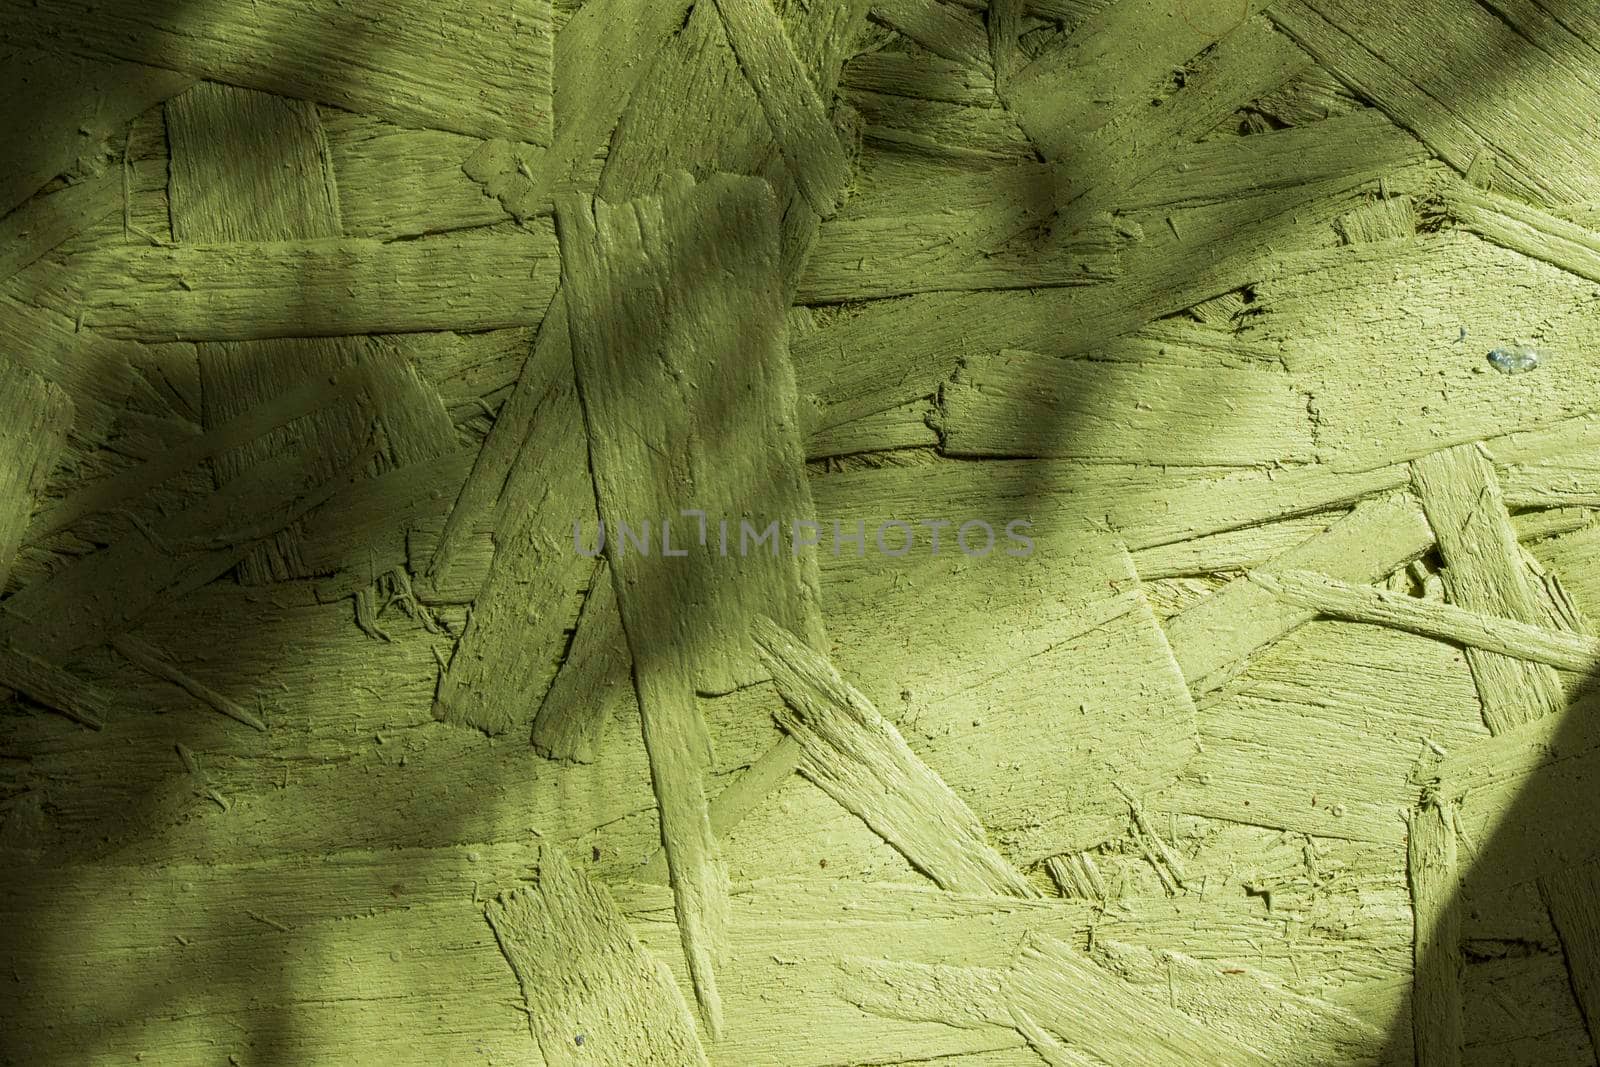 Green painted wood texture and background by Taidundua